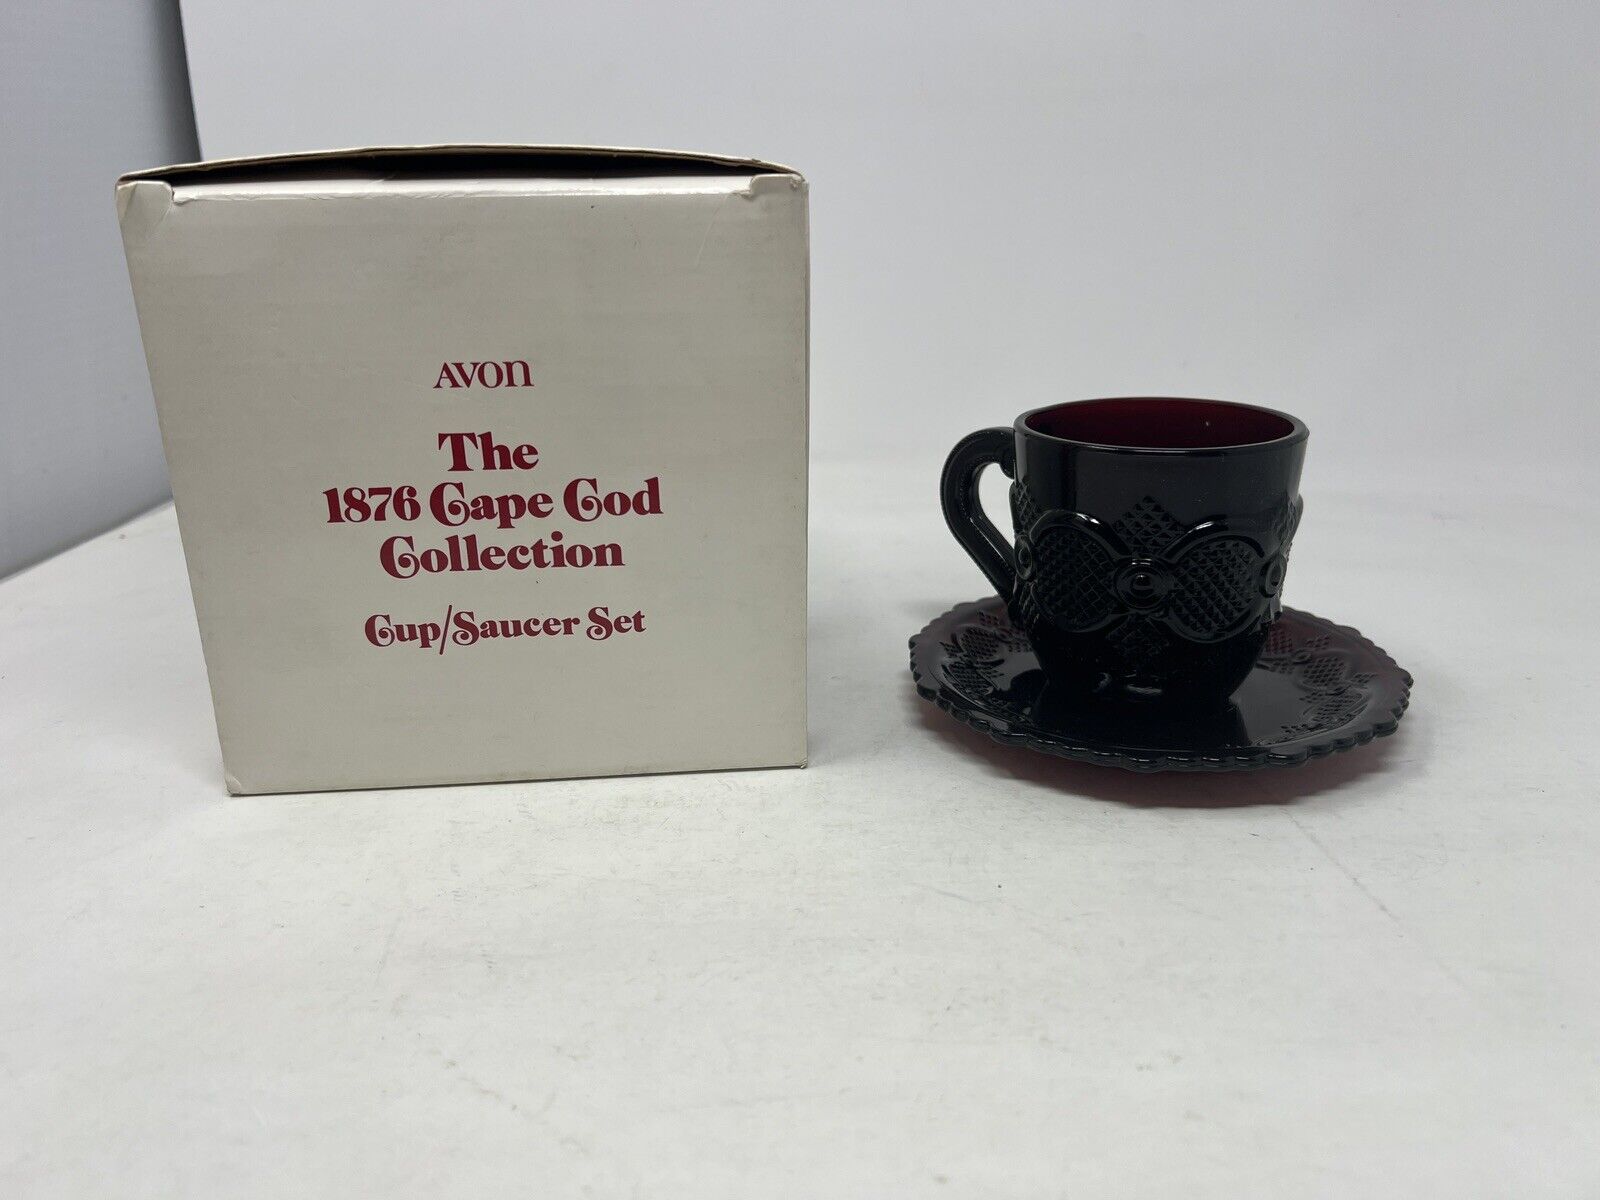 Avon The 1876 Cape Cod Collection Cup/Saucer Set with Box #2